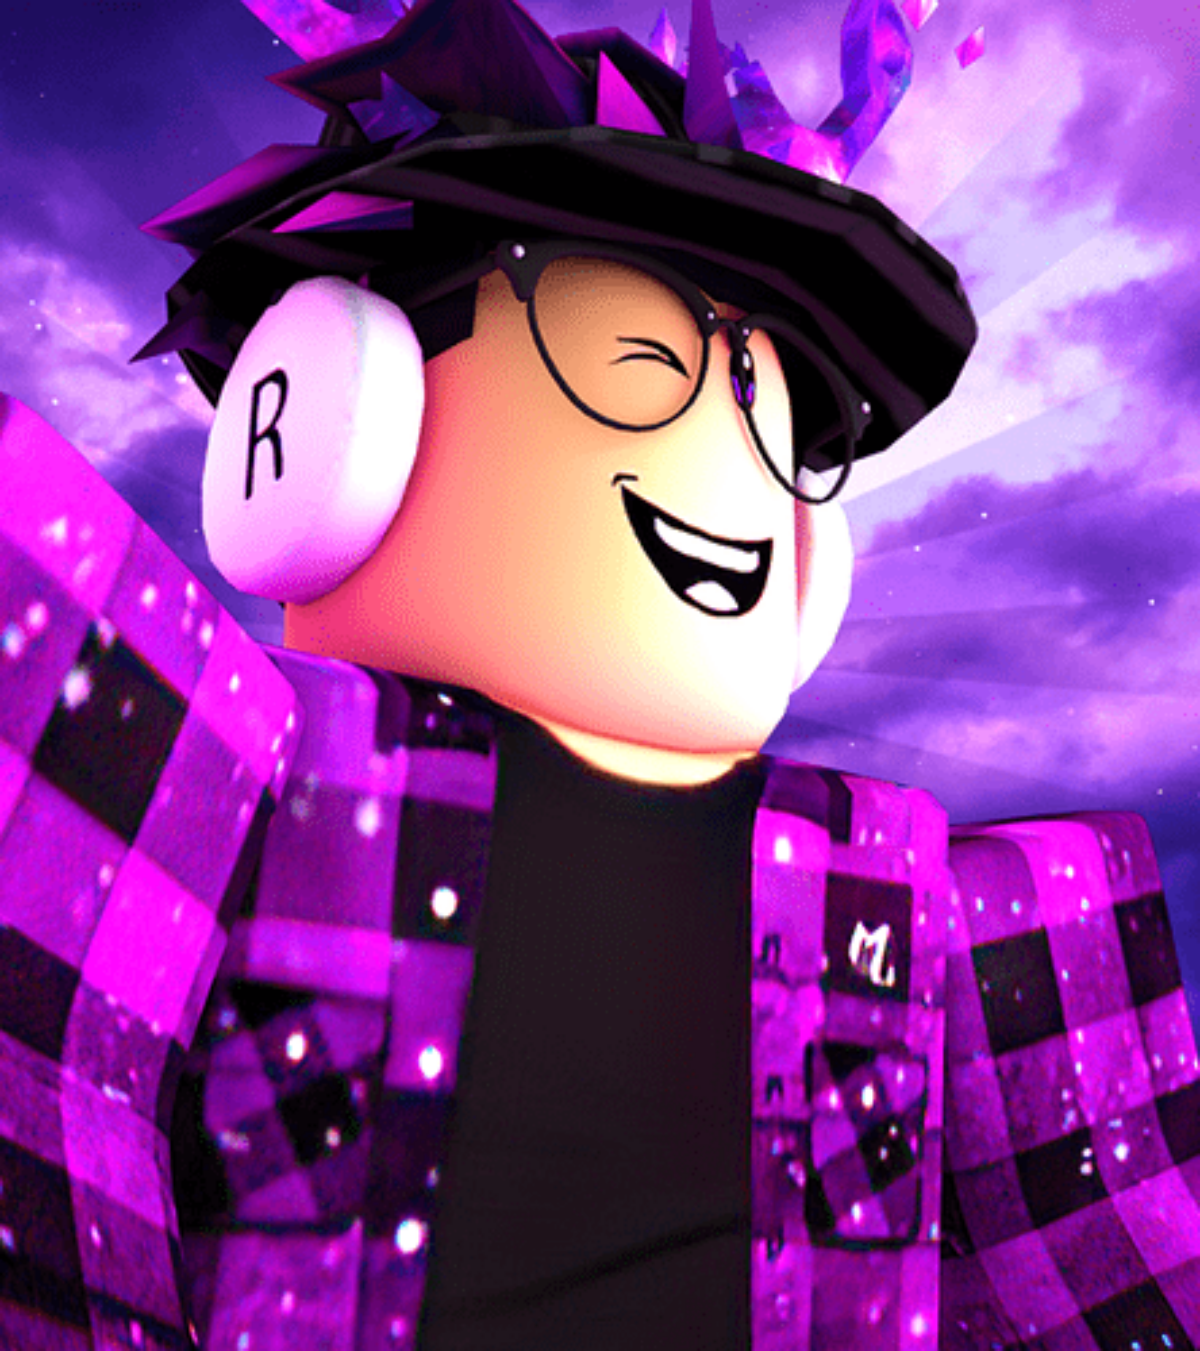 Get your favourite roblox pfp free